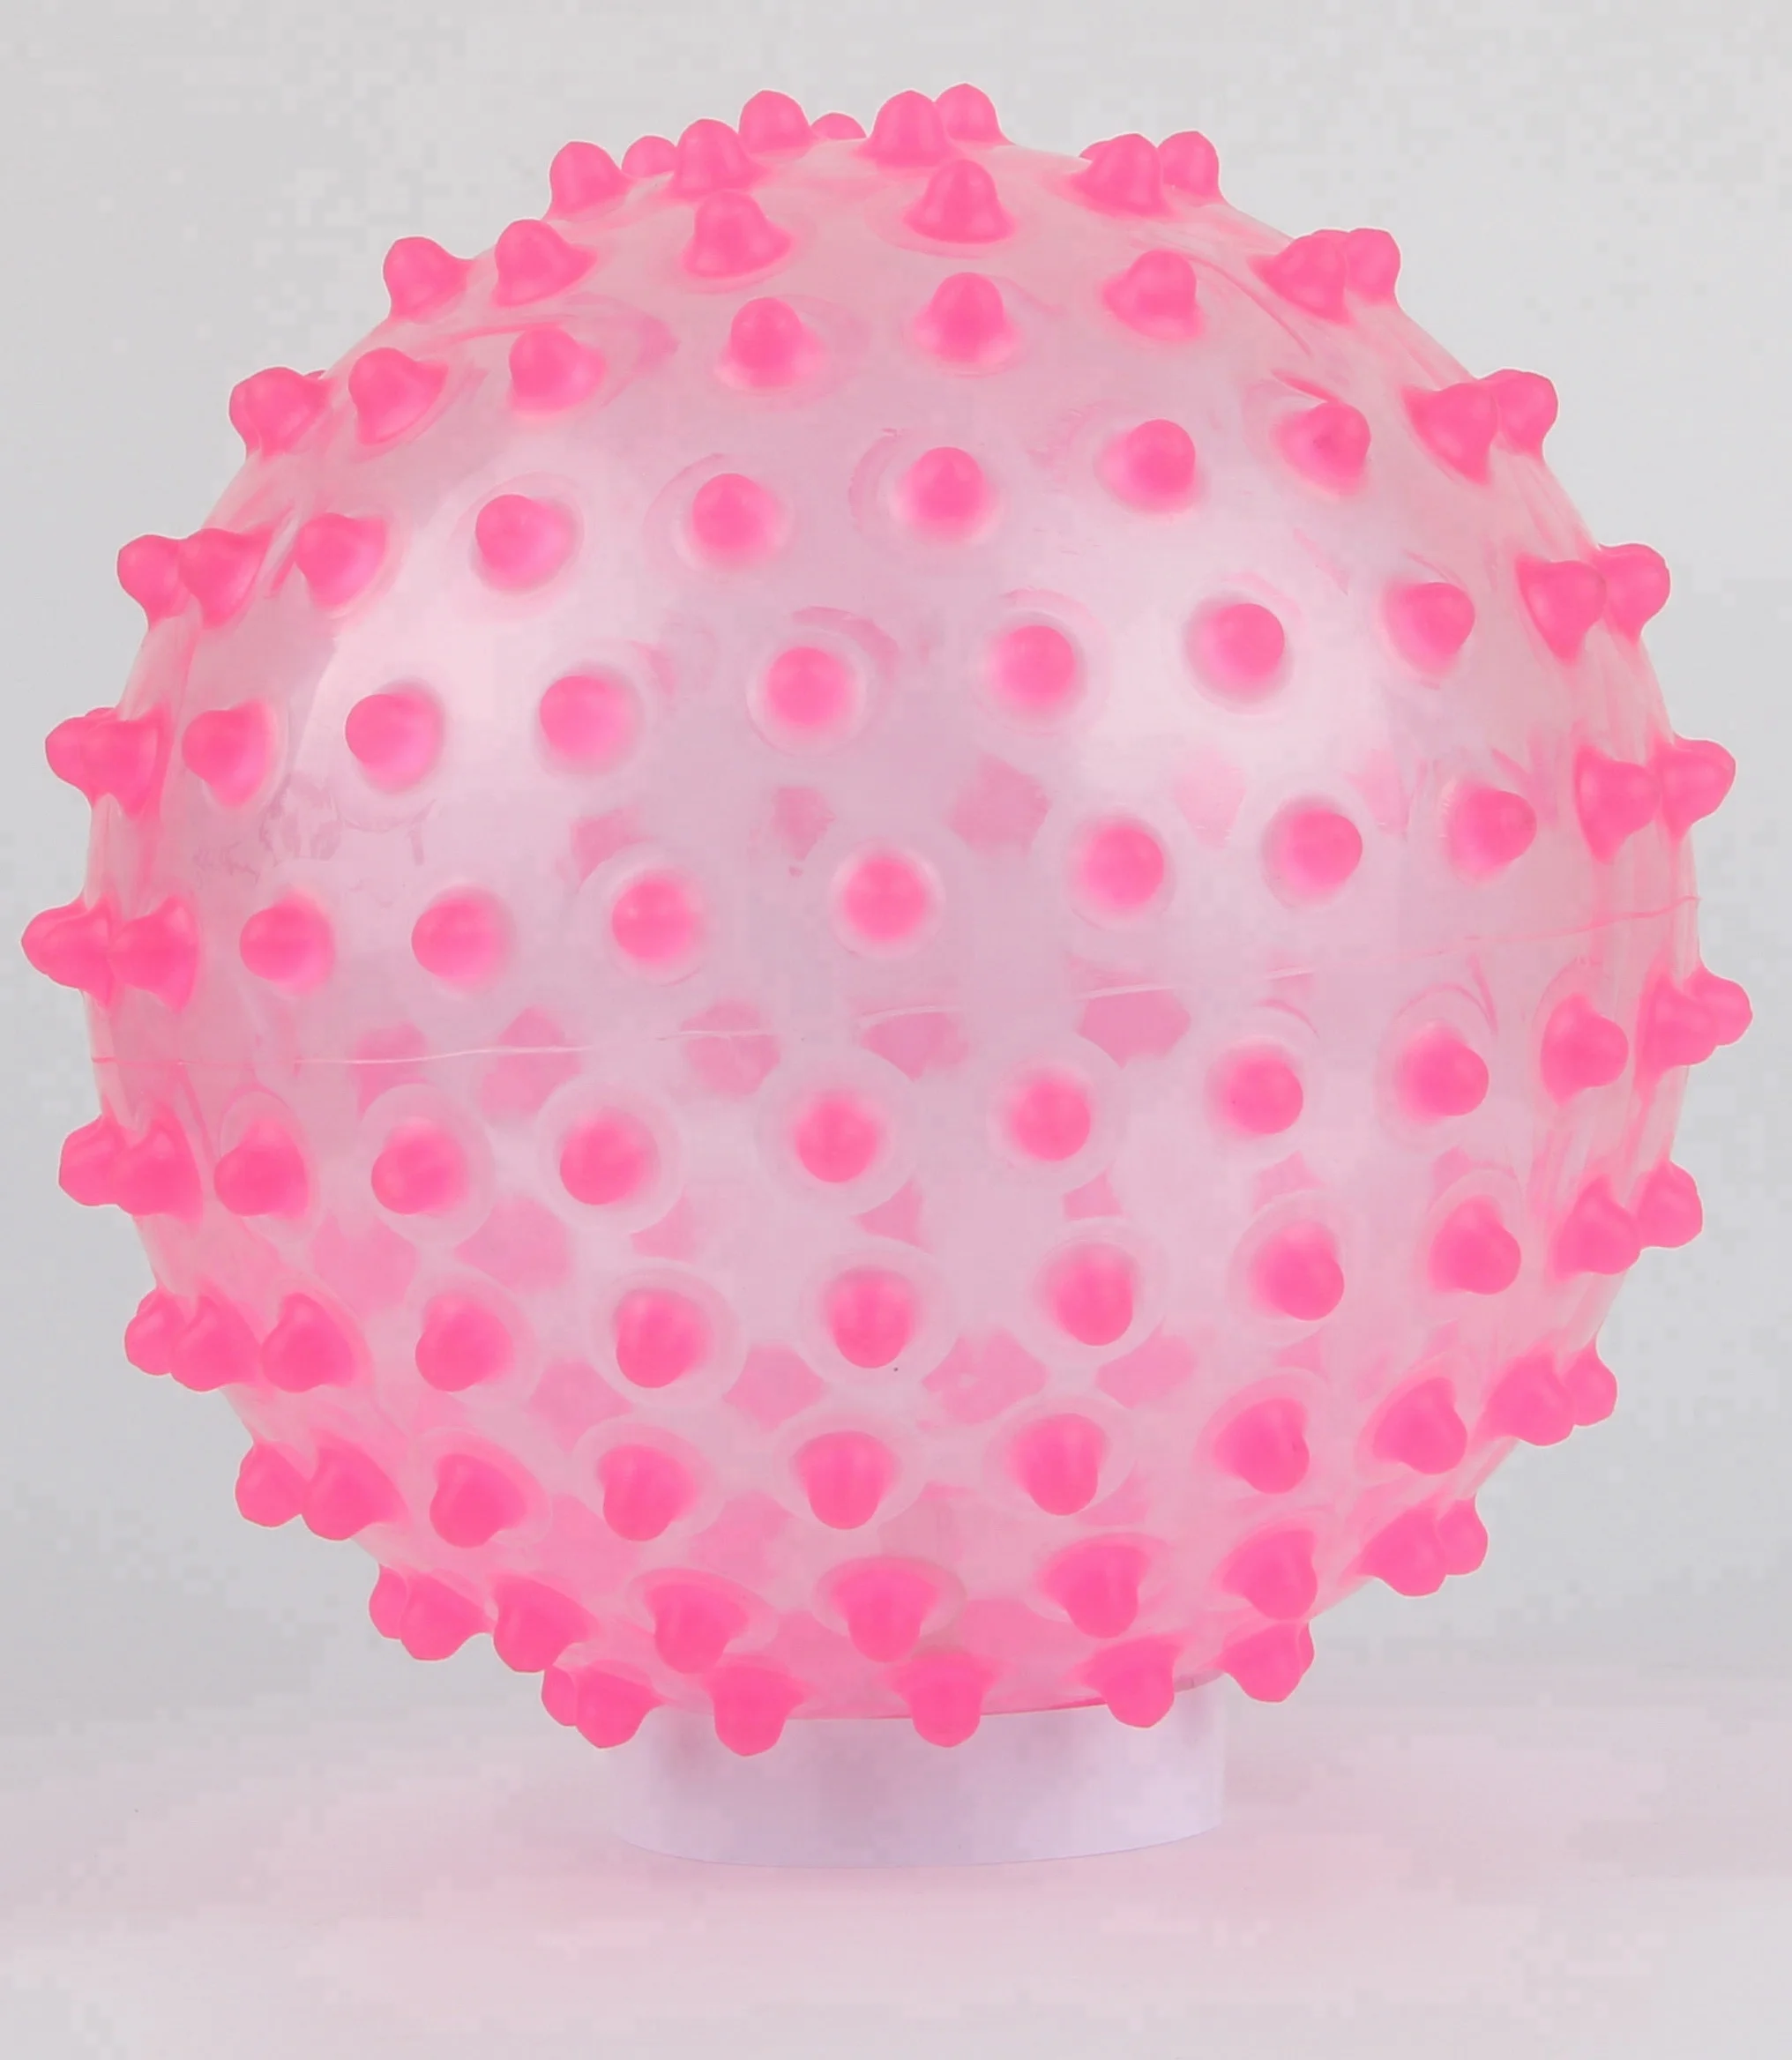 spike ball toy